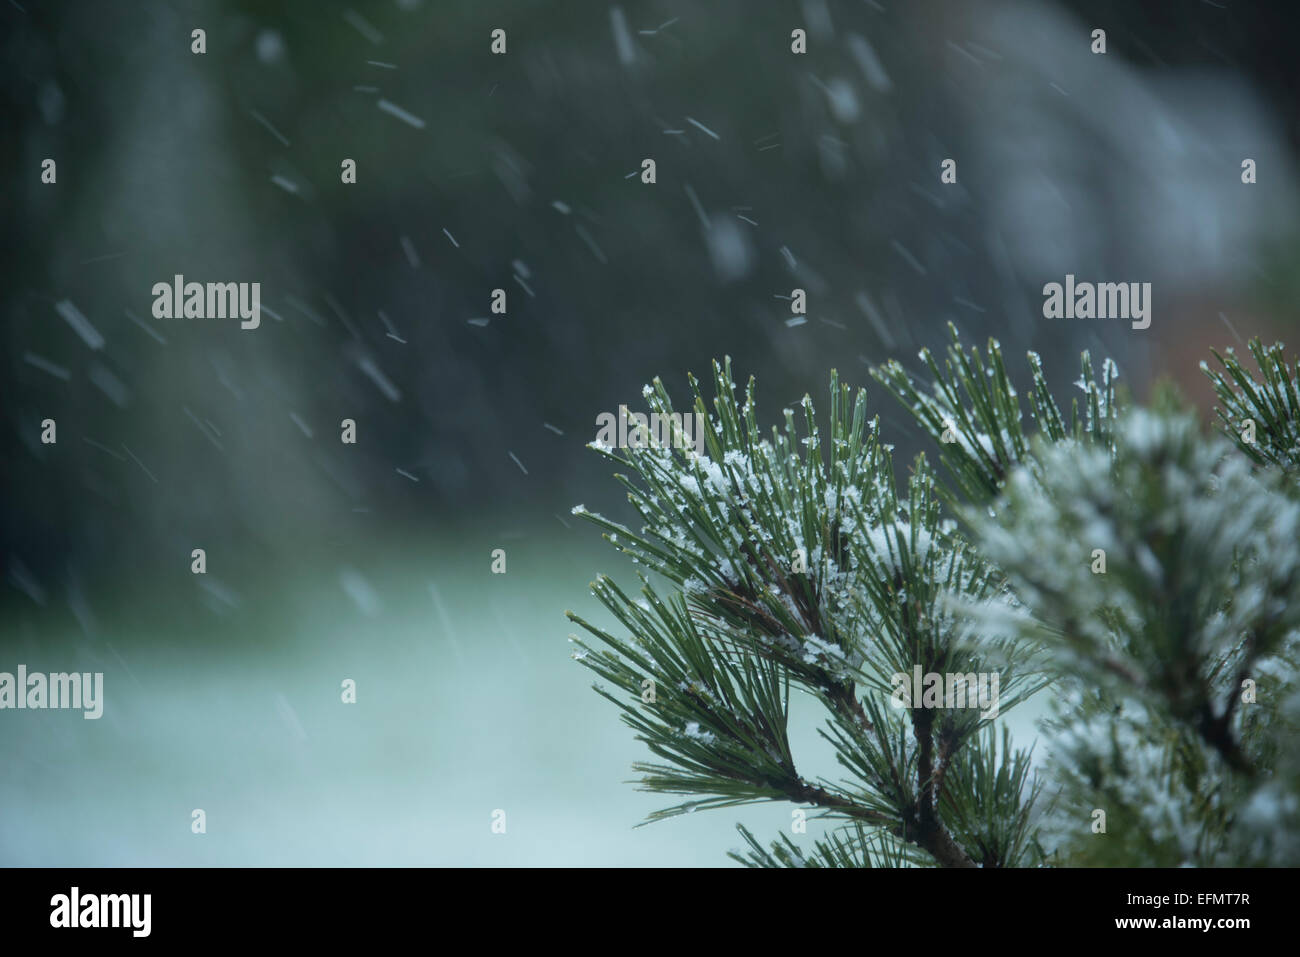 Snowing on the pines. Stock Photo